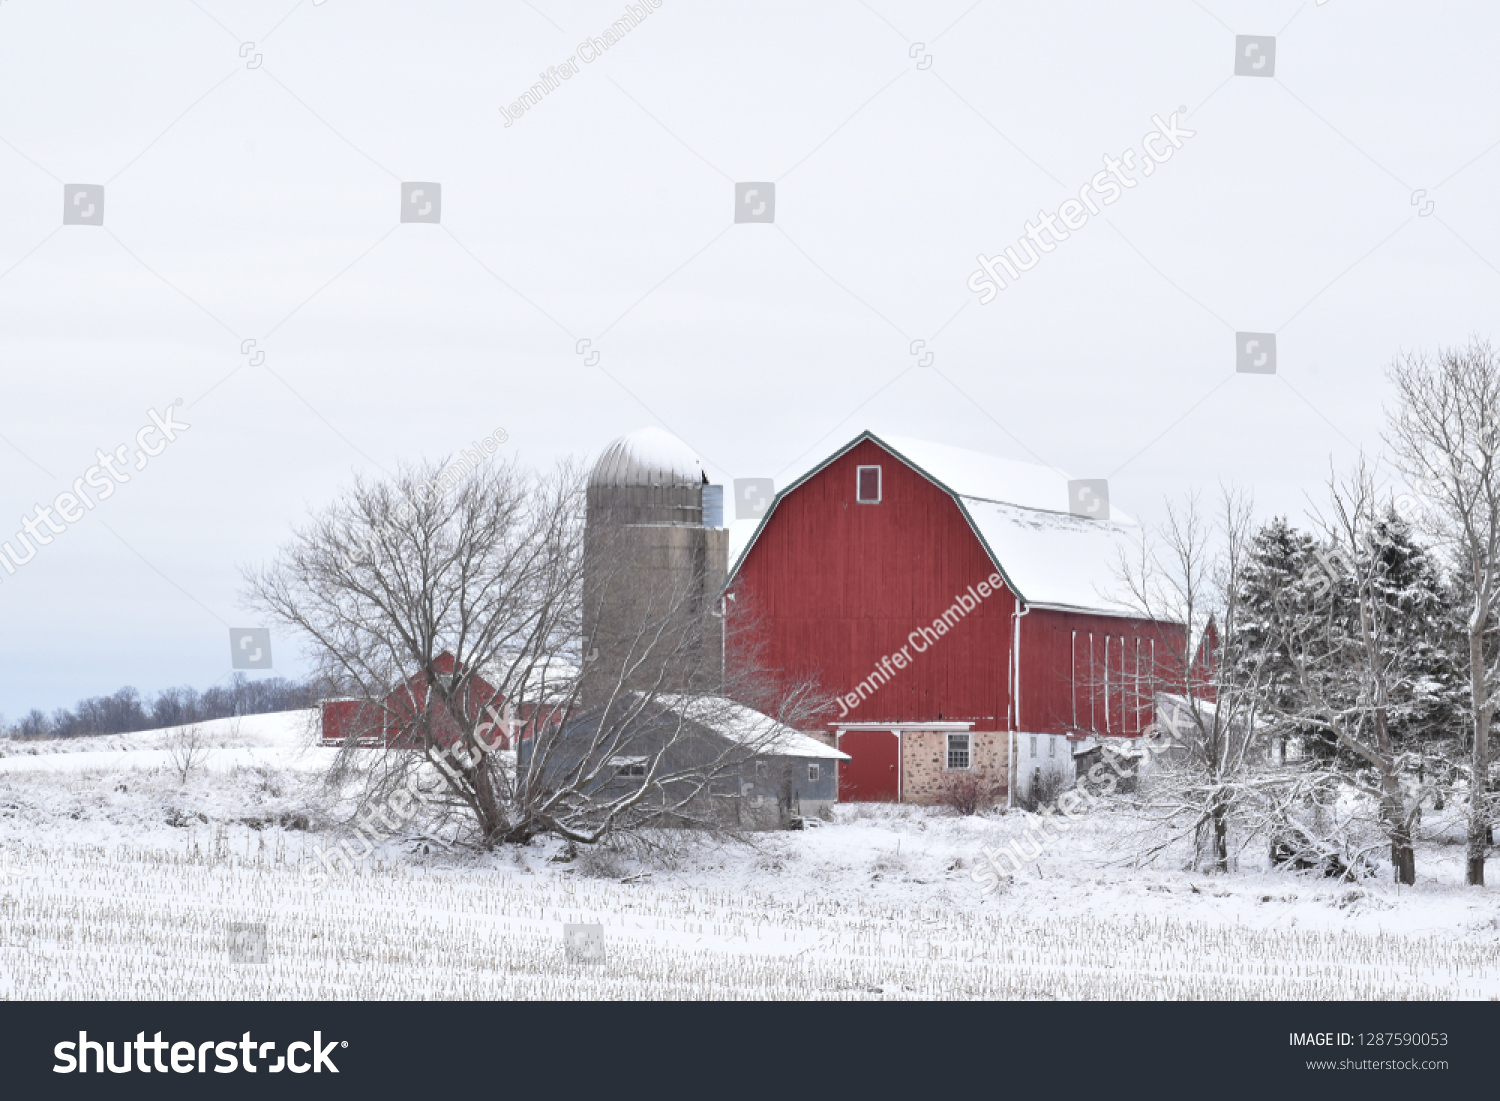 3dRose lsp_212579_6 Print of Red Country Barn and Silo 2 Plug Outlet Cover 